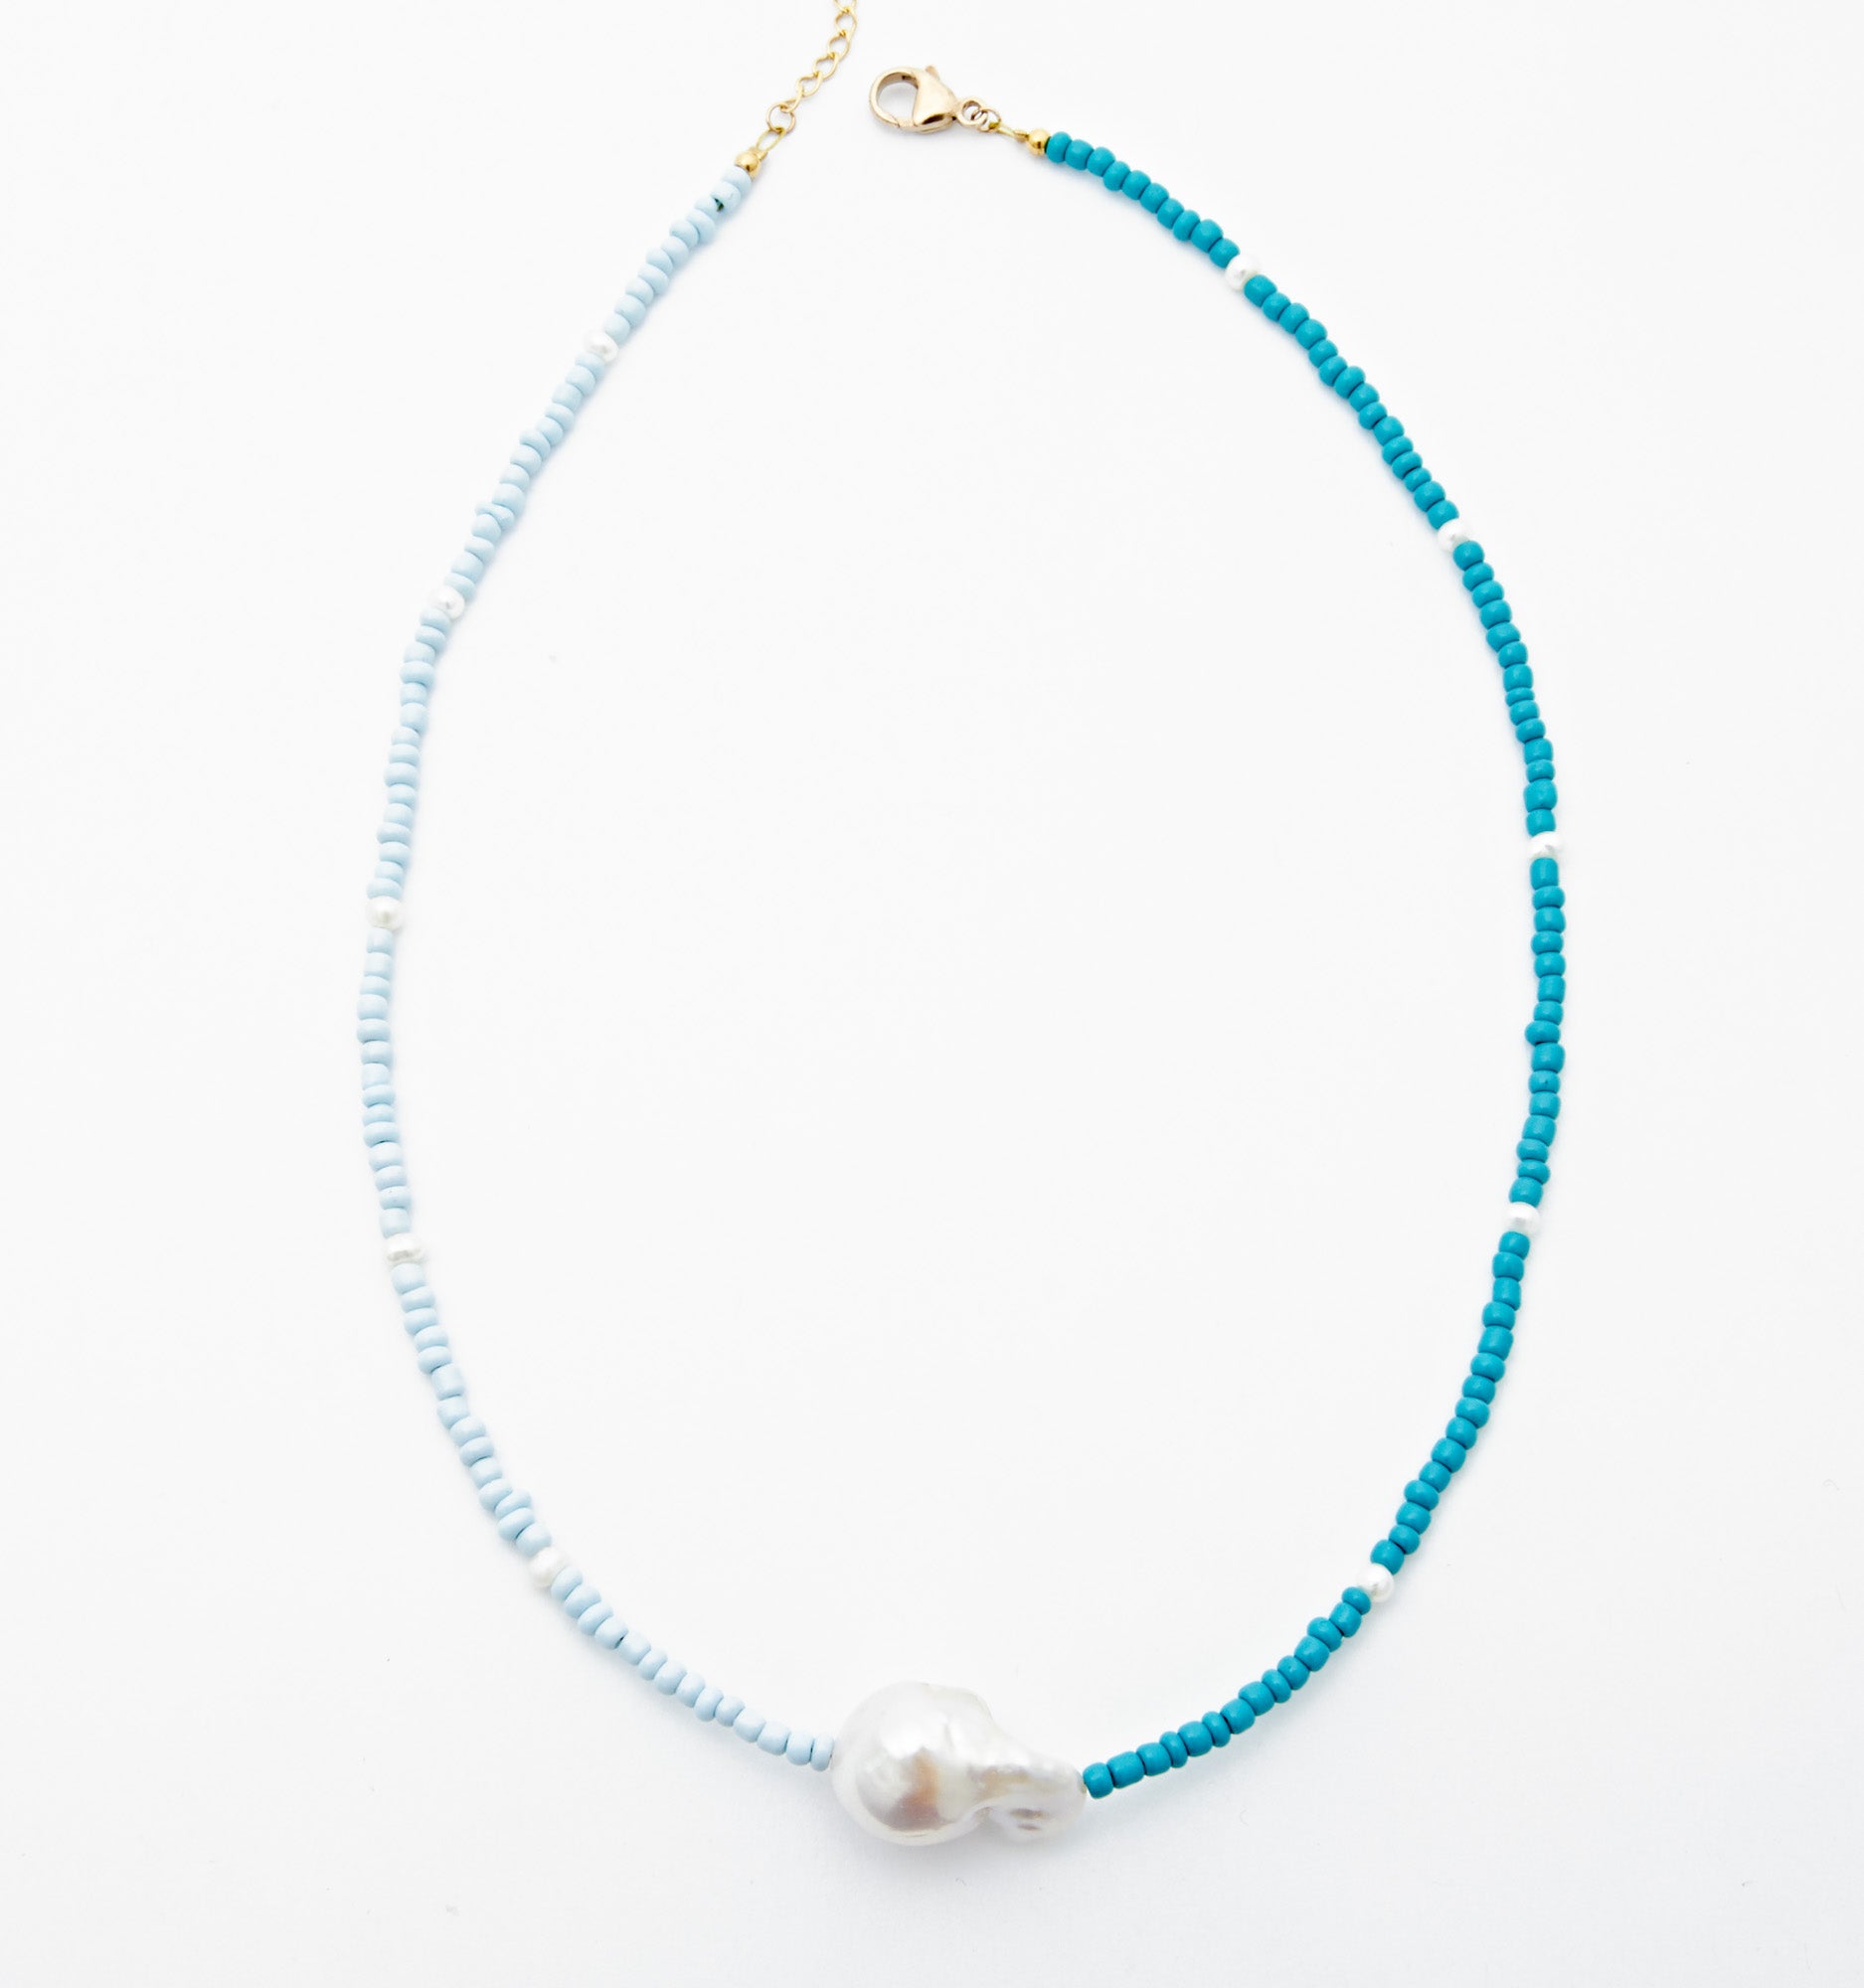 Pearl Choker Necklace in Turquoise Blues